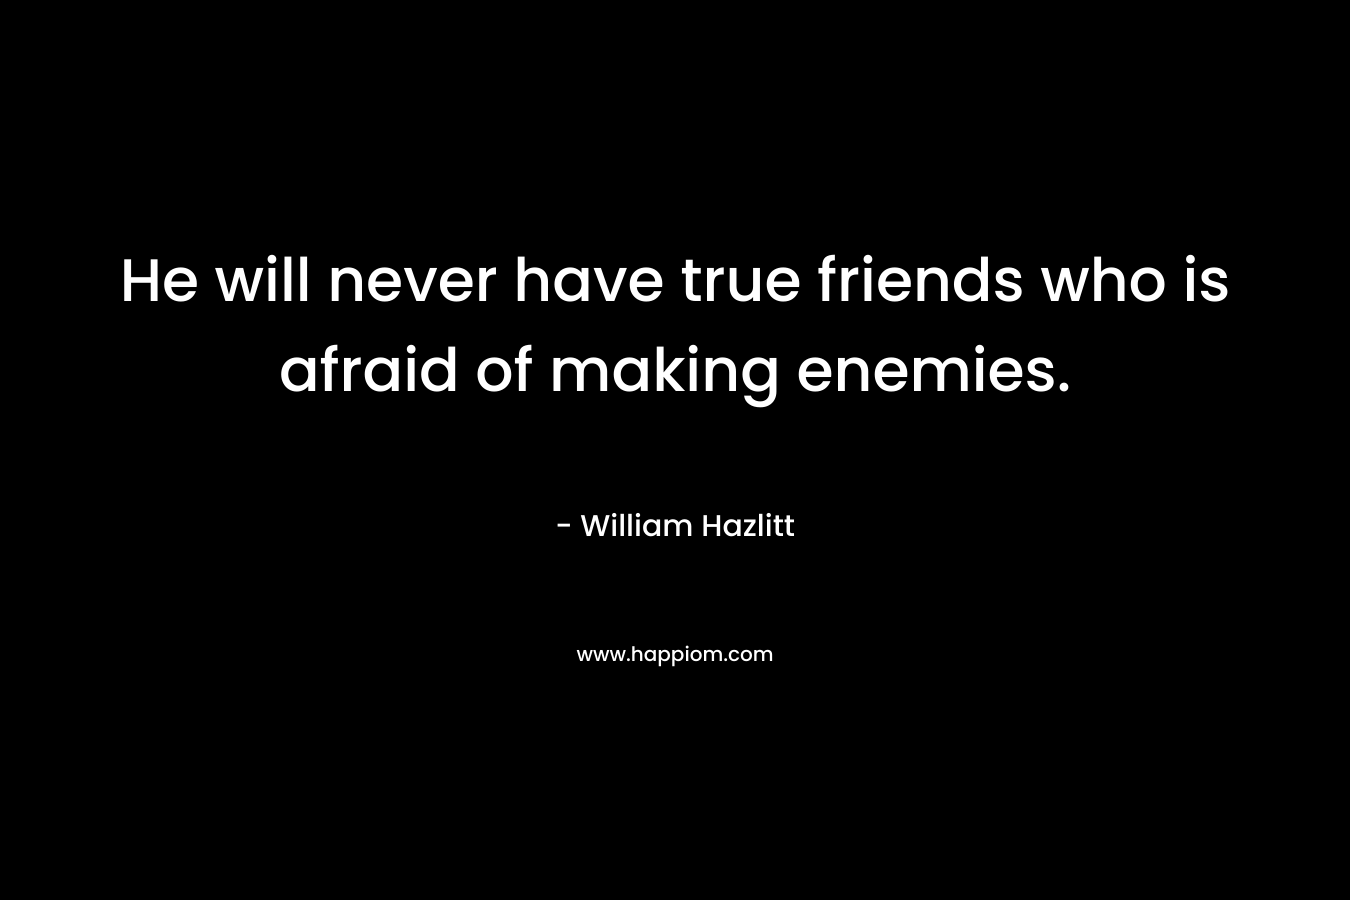 He will never have true friends who is afraid of making enemies.